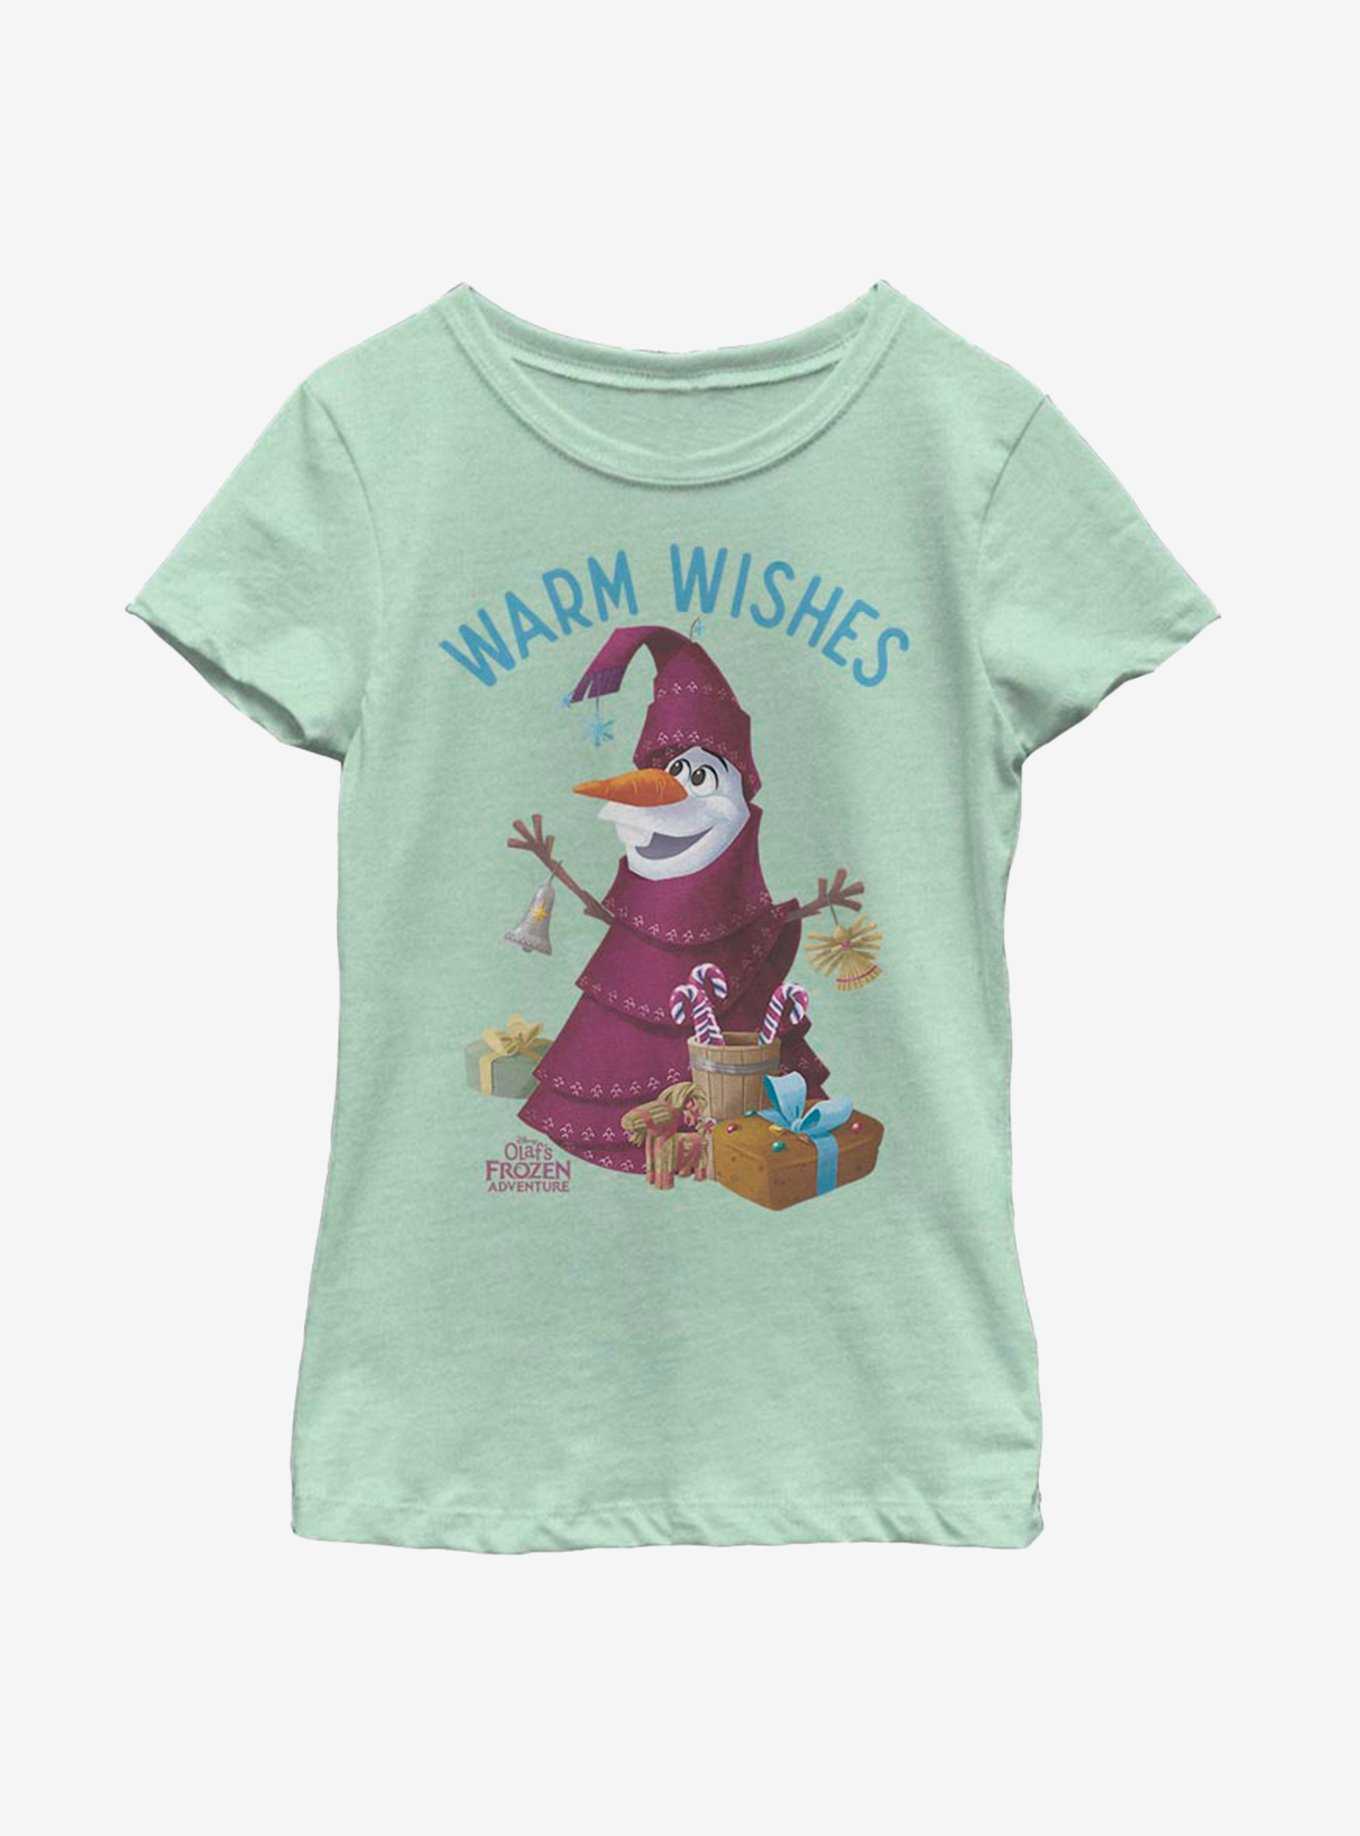 Disney Frozen Olaf Wishes Youth Girls T-Shirt, , hi-res